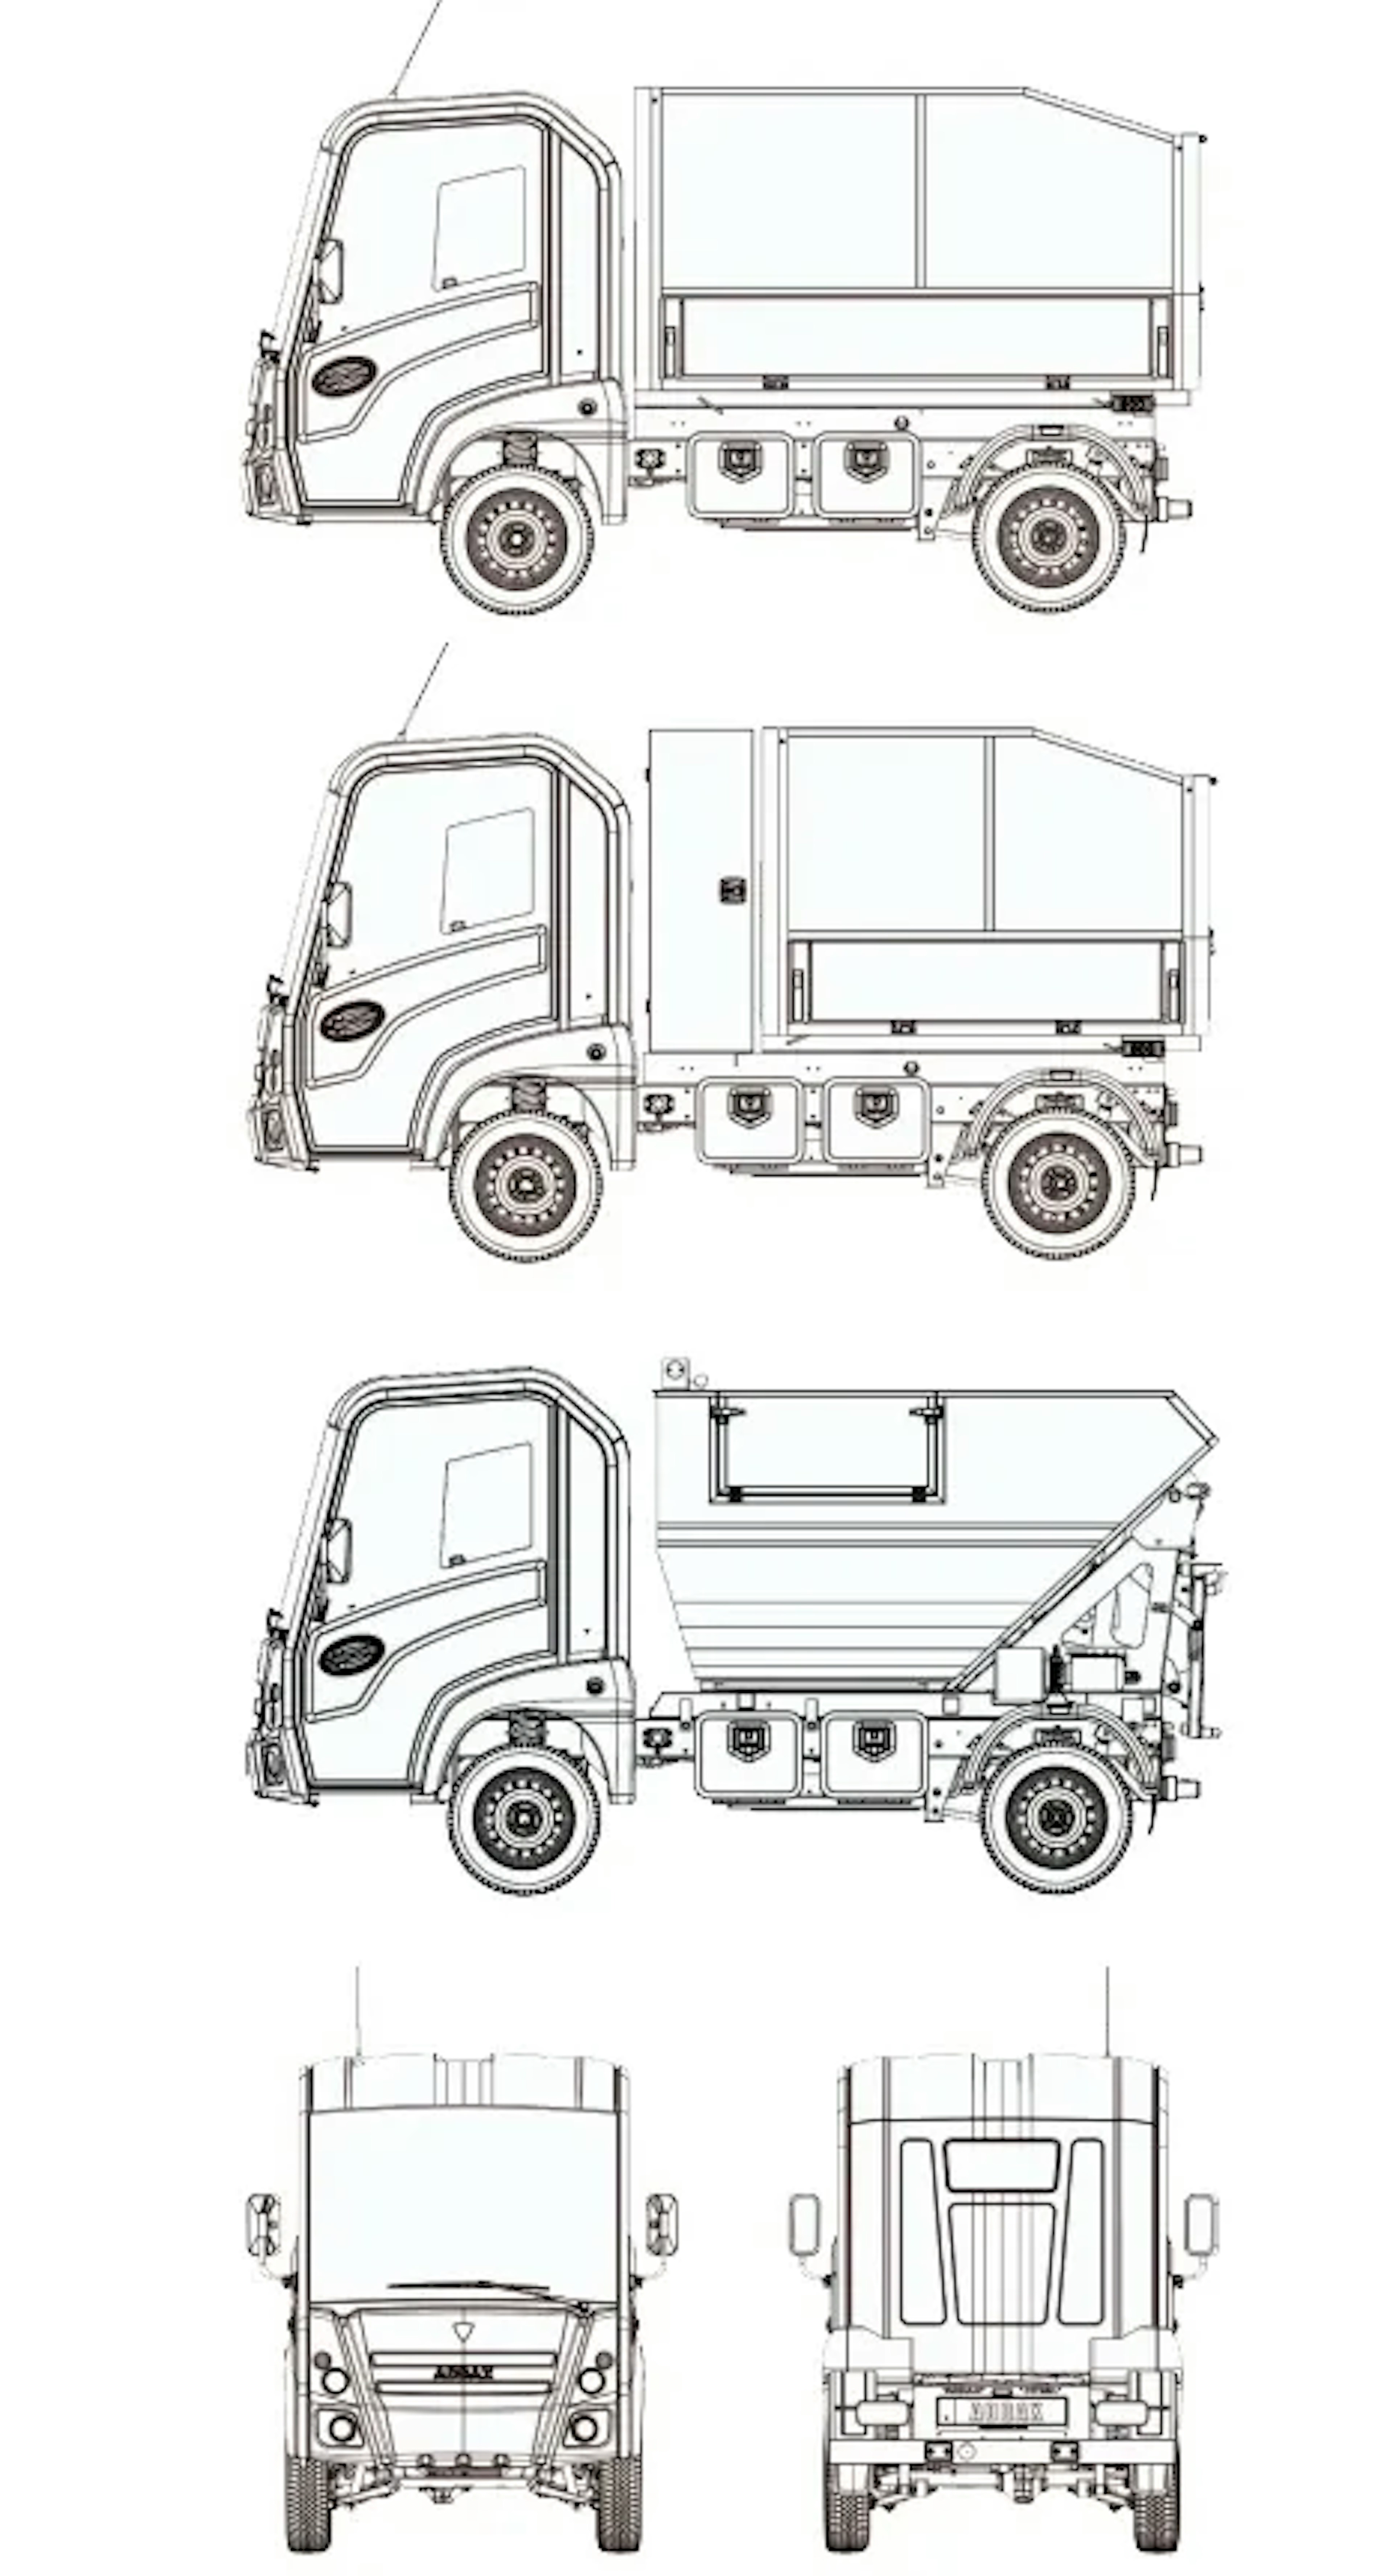 mtx chassis specification